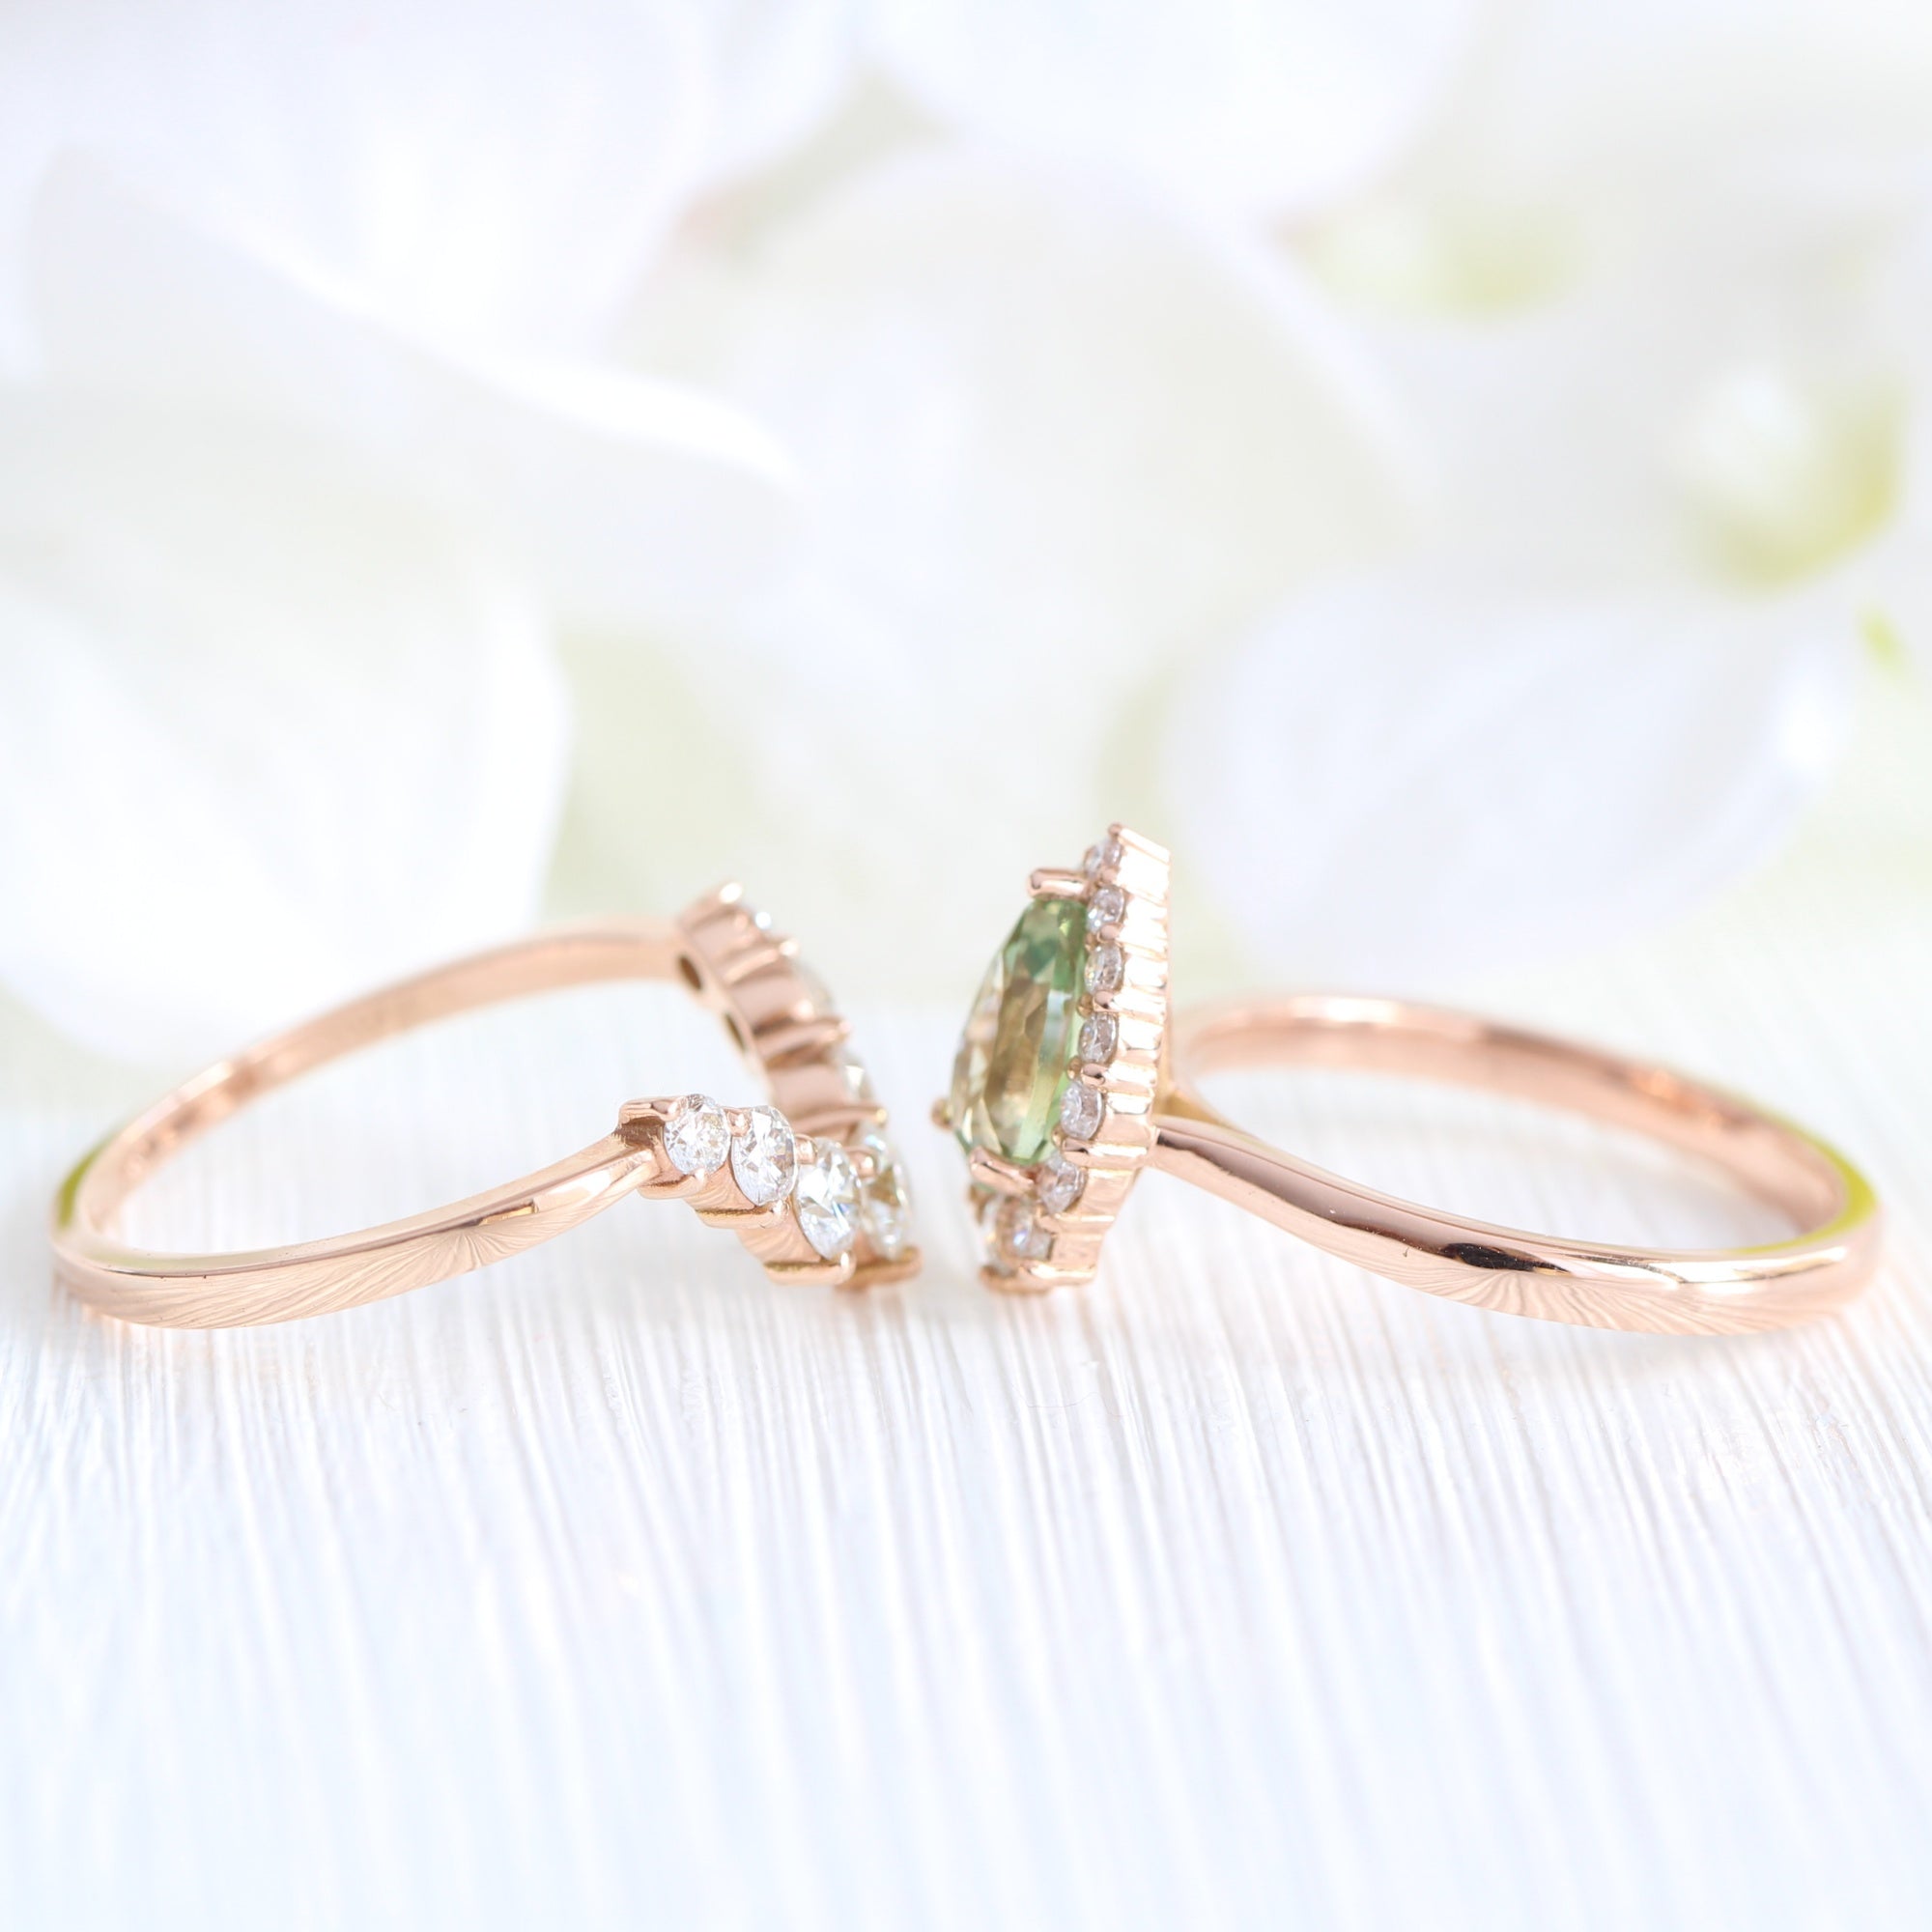 Pear green sapphire ring rose gold curved 7 diamond wedding band la more design jewelry